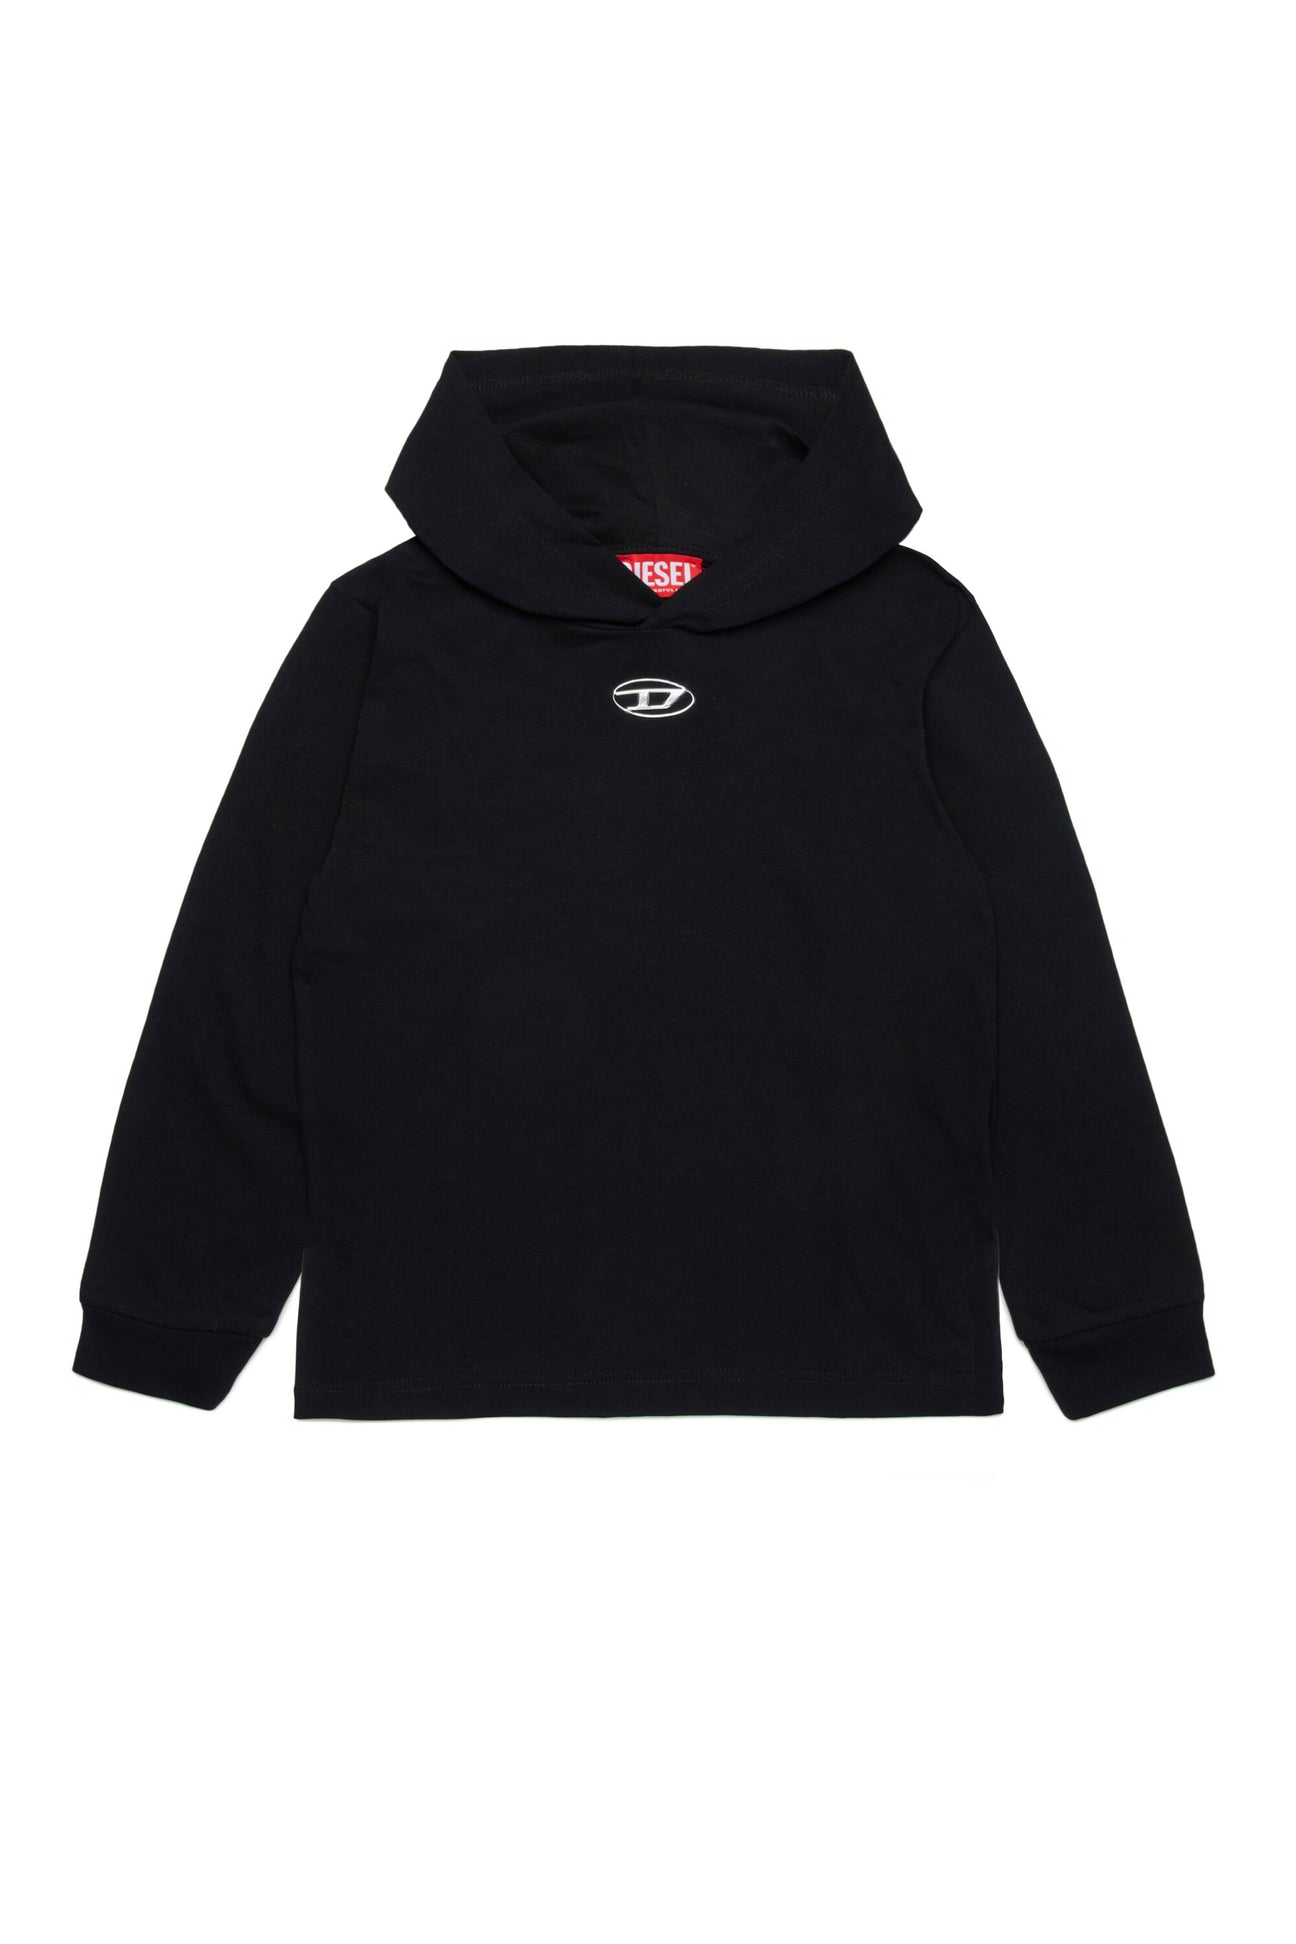 Hooded T-shirt with oval D logo 